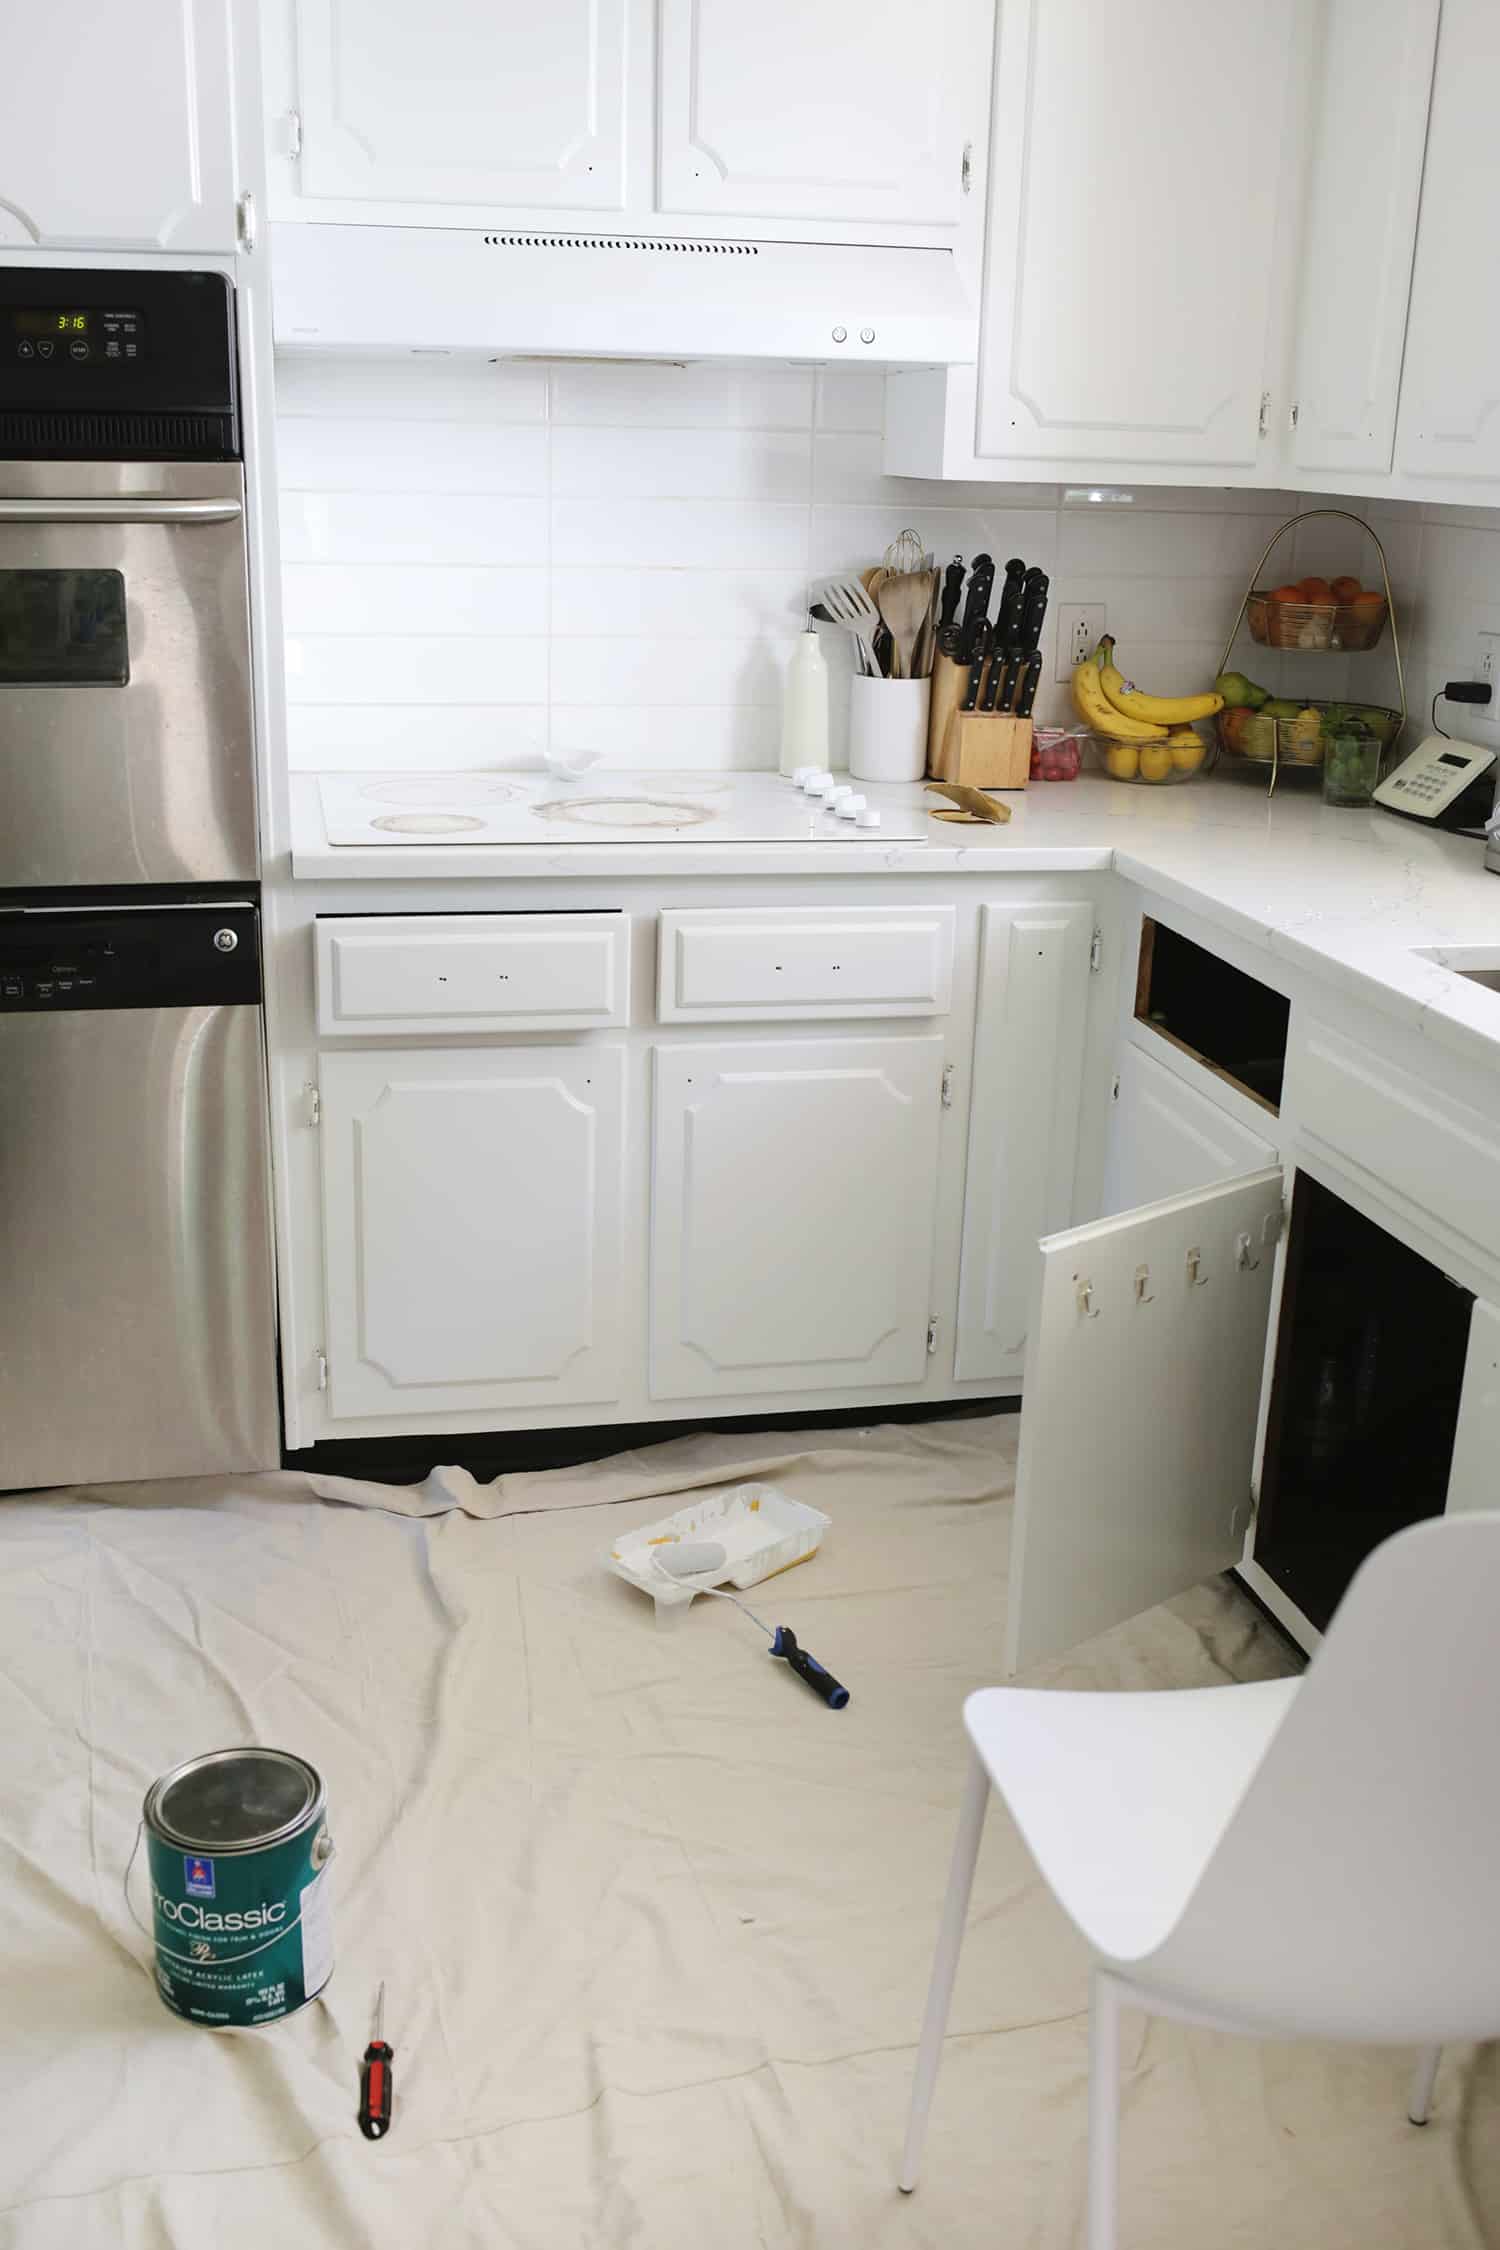 white kitchen with no handles on cabinets and a drawer missing with one cabinet door open